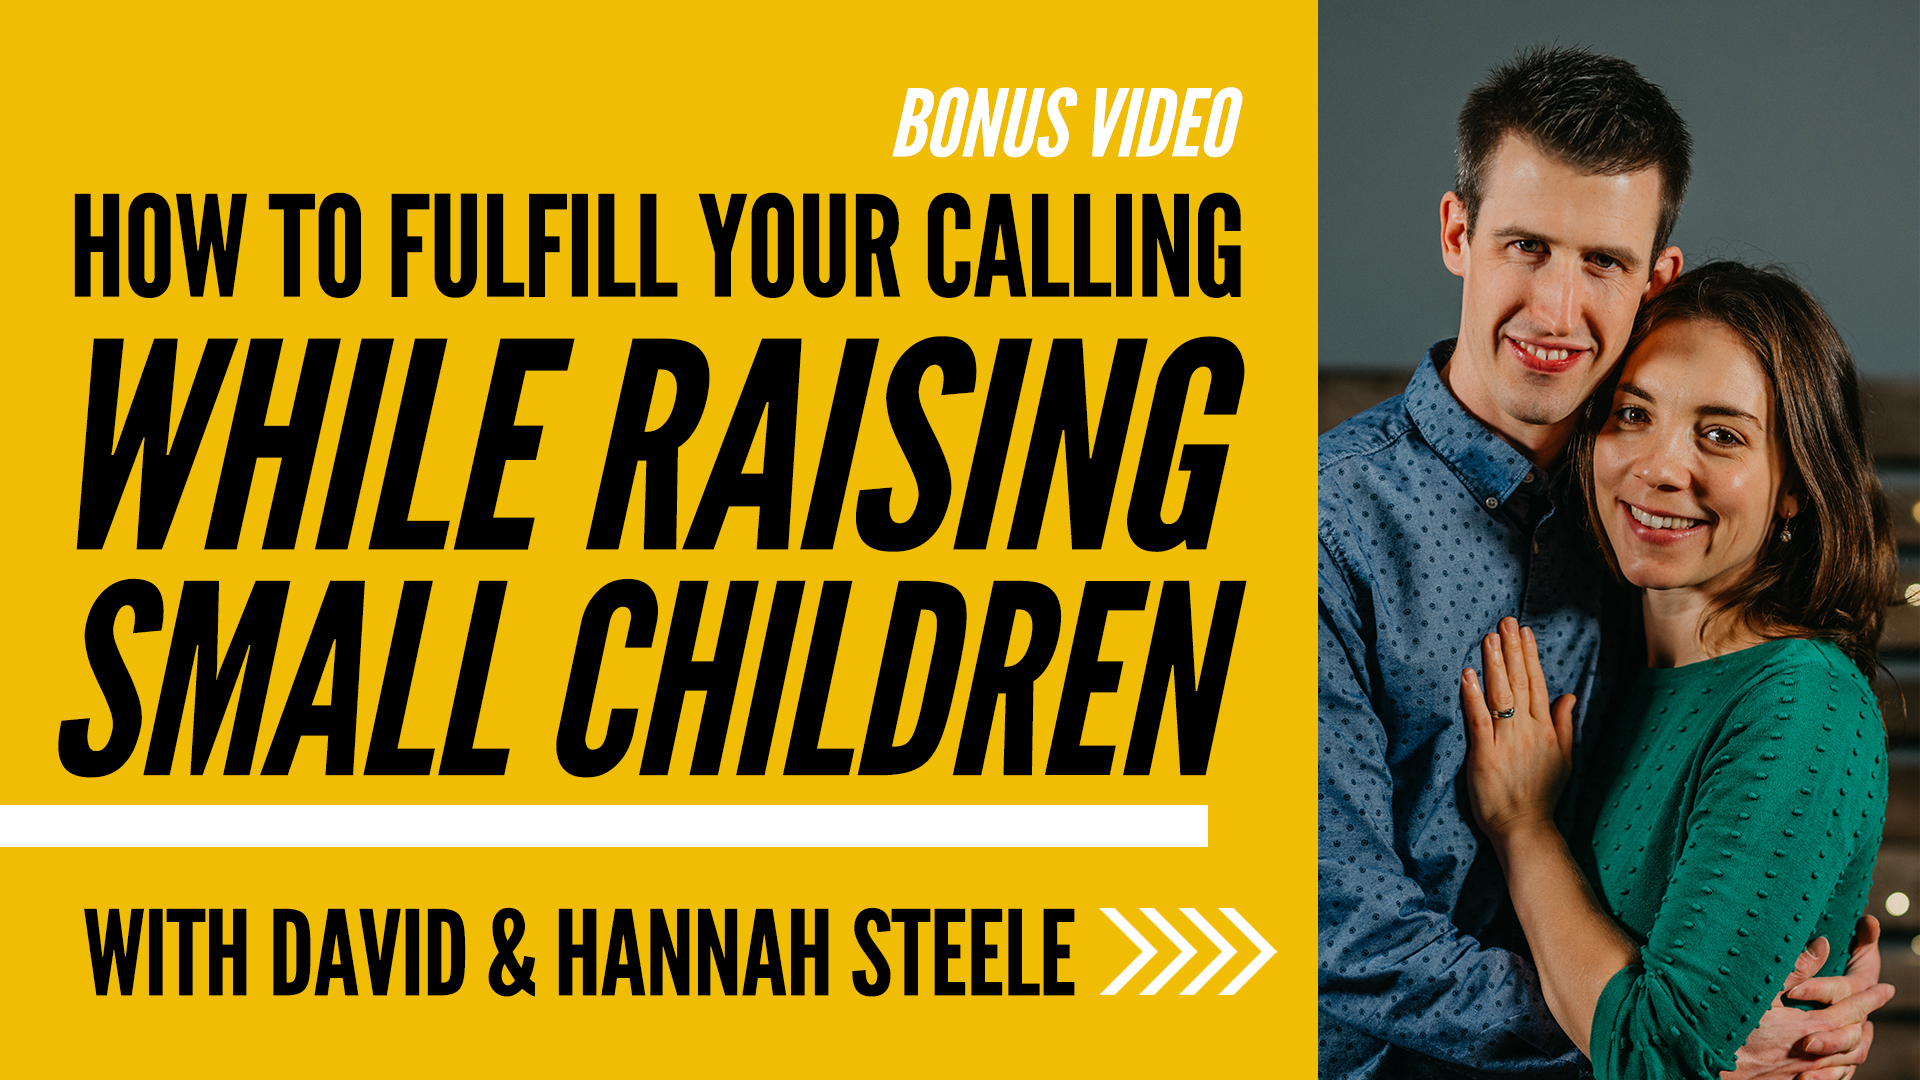 Raising Small Children with David and Hannah Steele